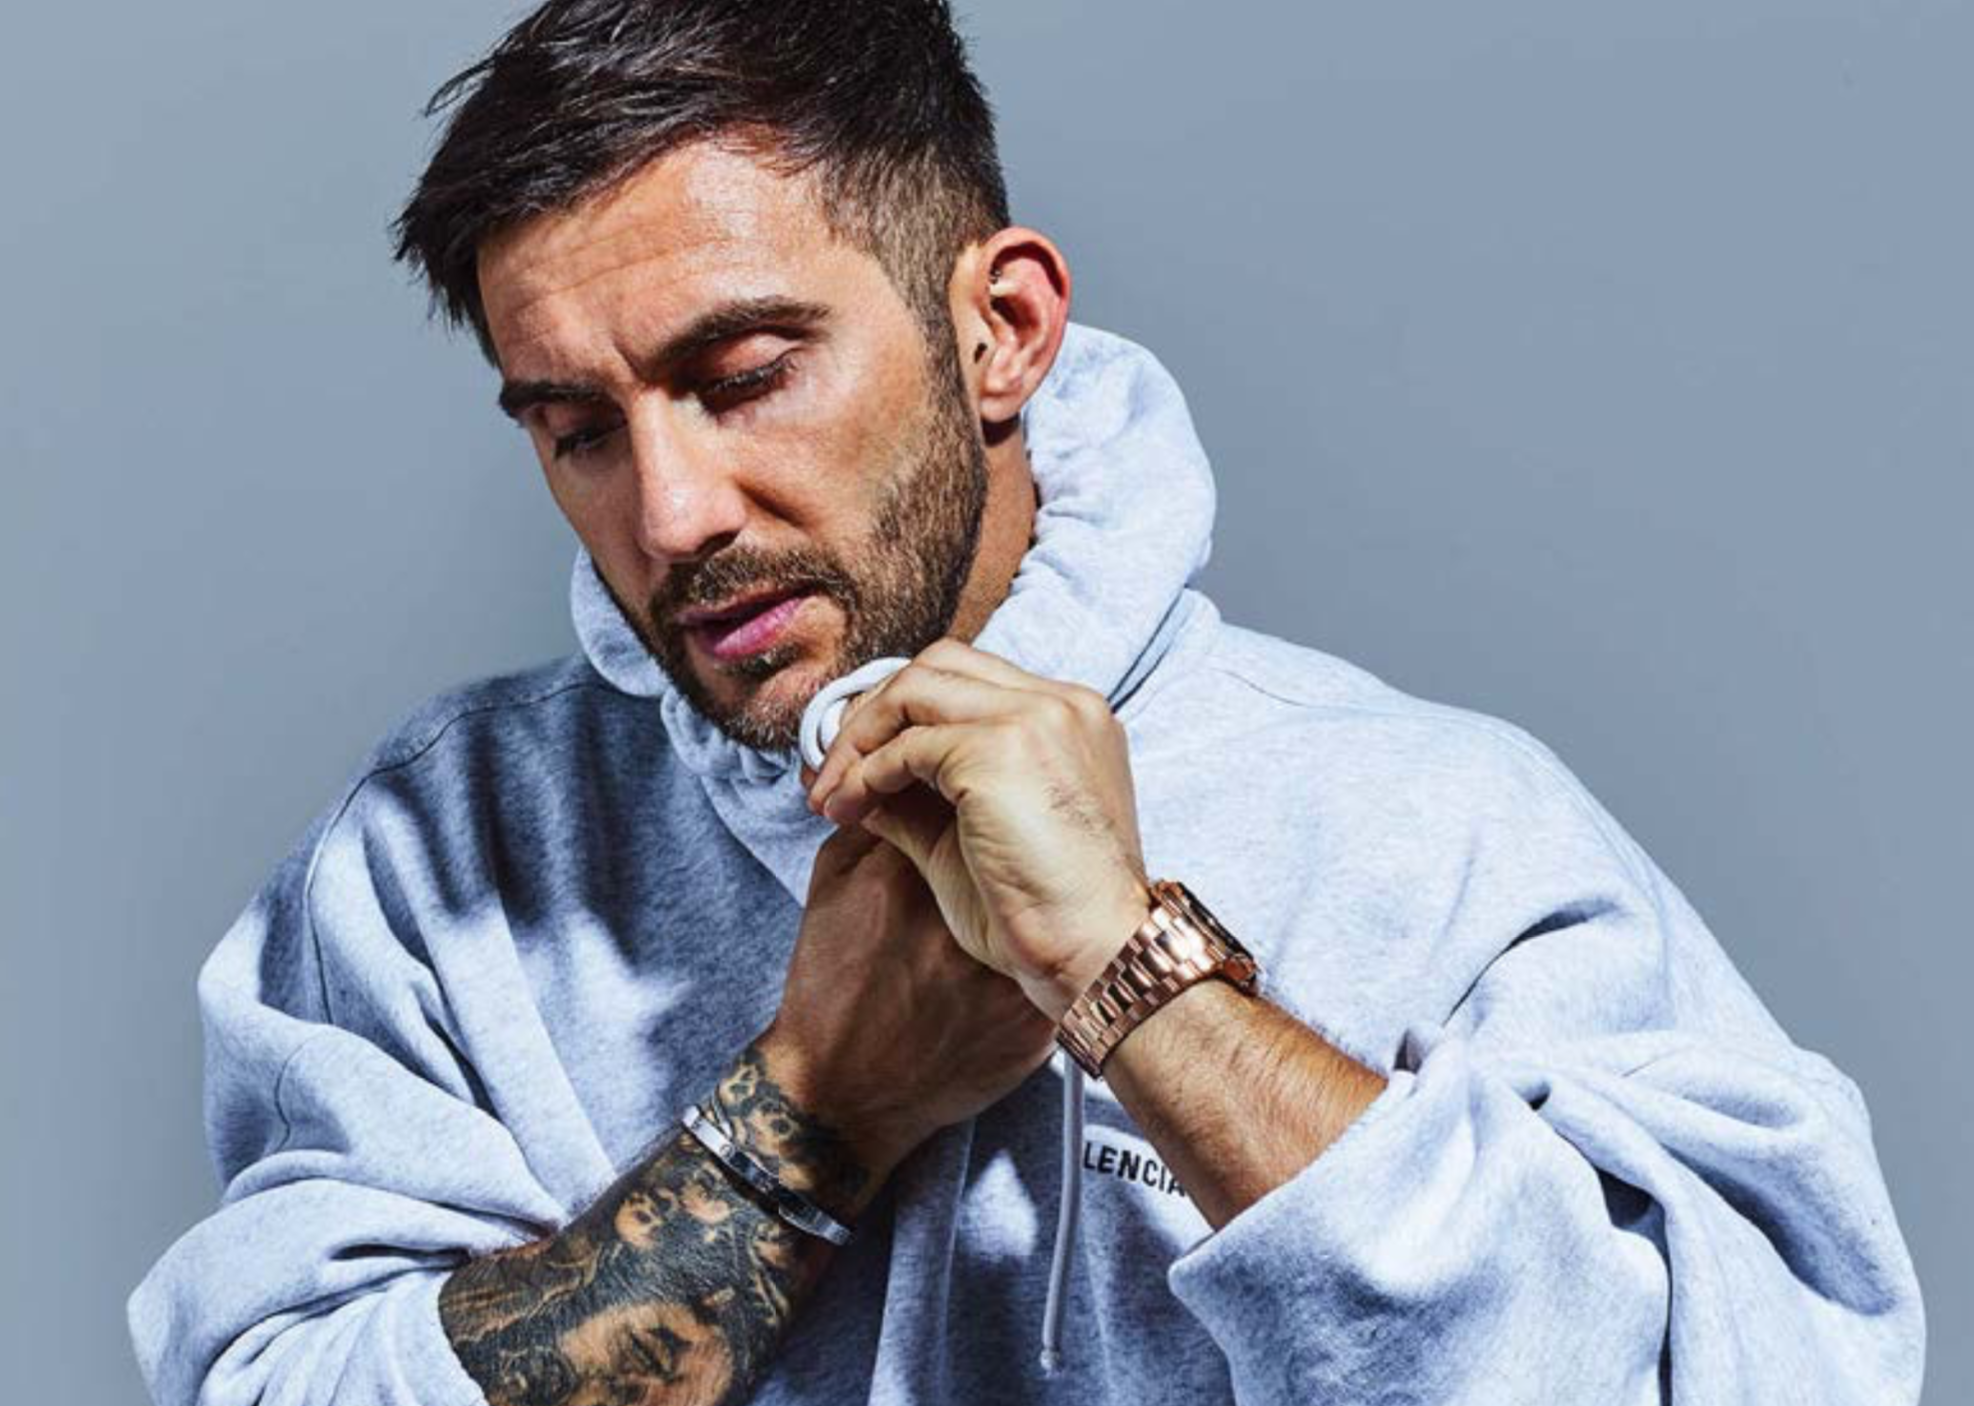 Hot Since 82 on creativity, tragedy and Labyrinth&#039;s return to Pacha